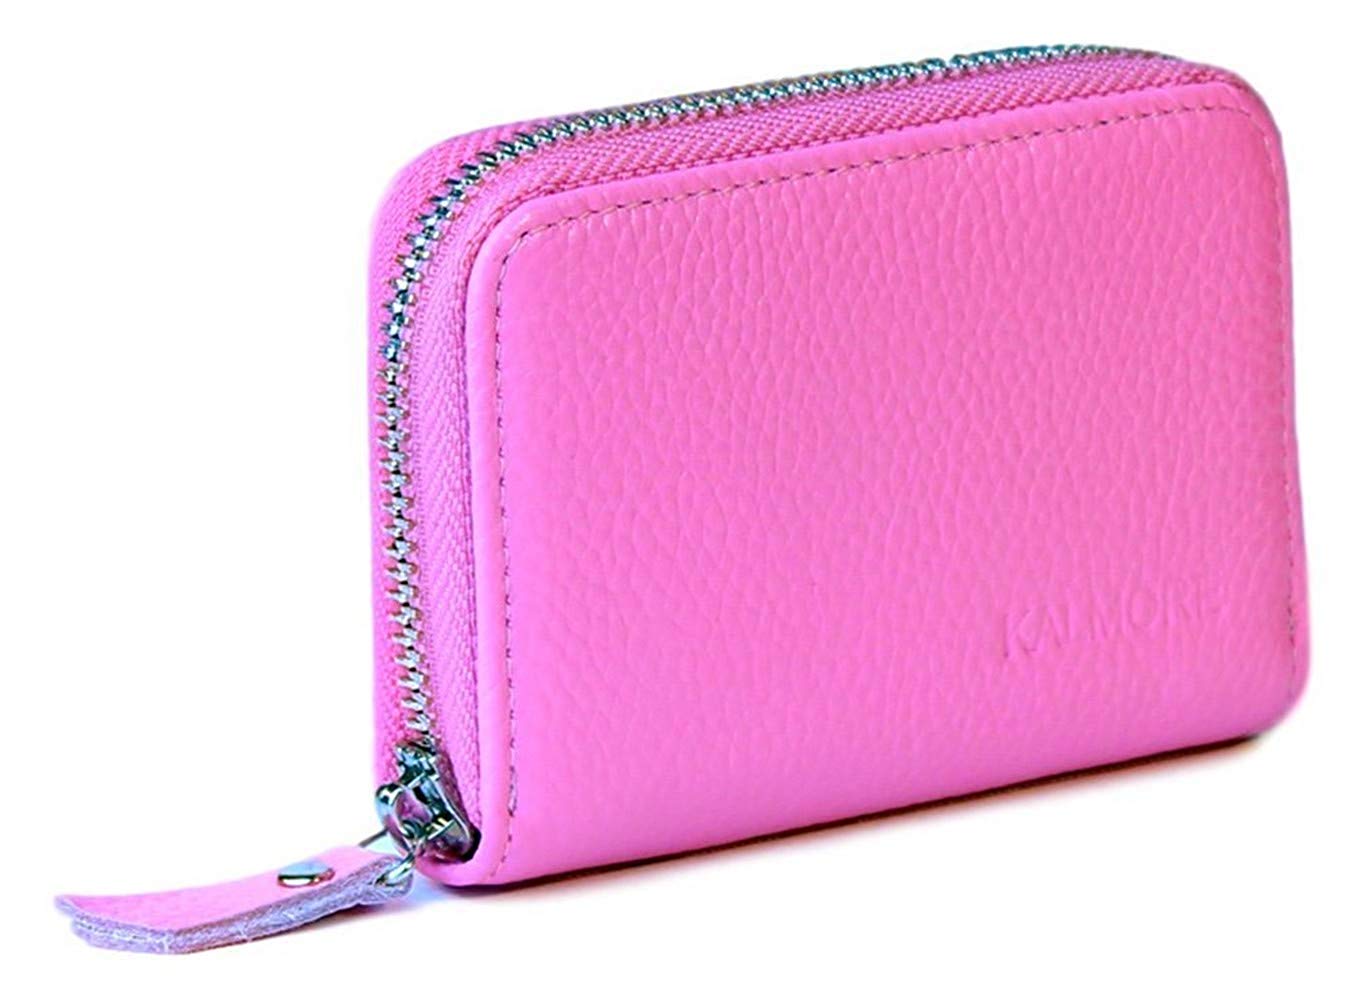 Women's Genuine Leather Credit Card Holder RFID Secure Spacious Cute ...